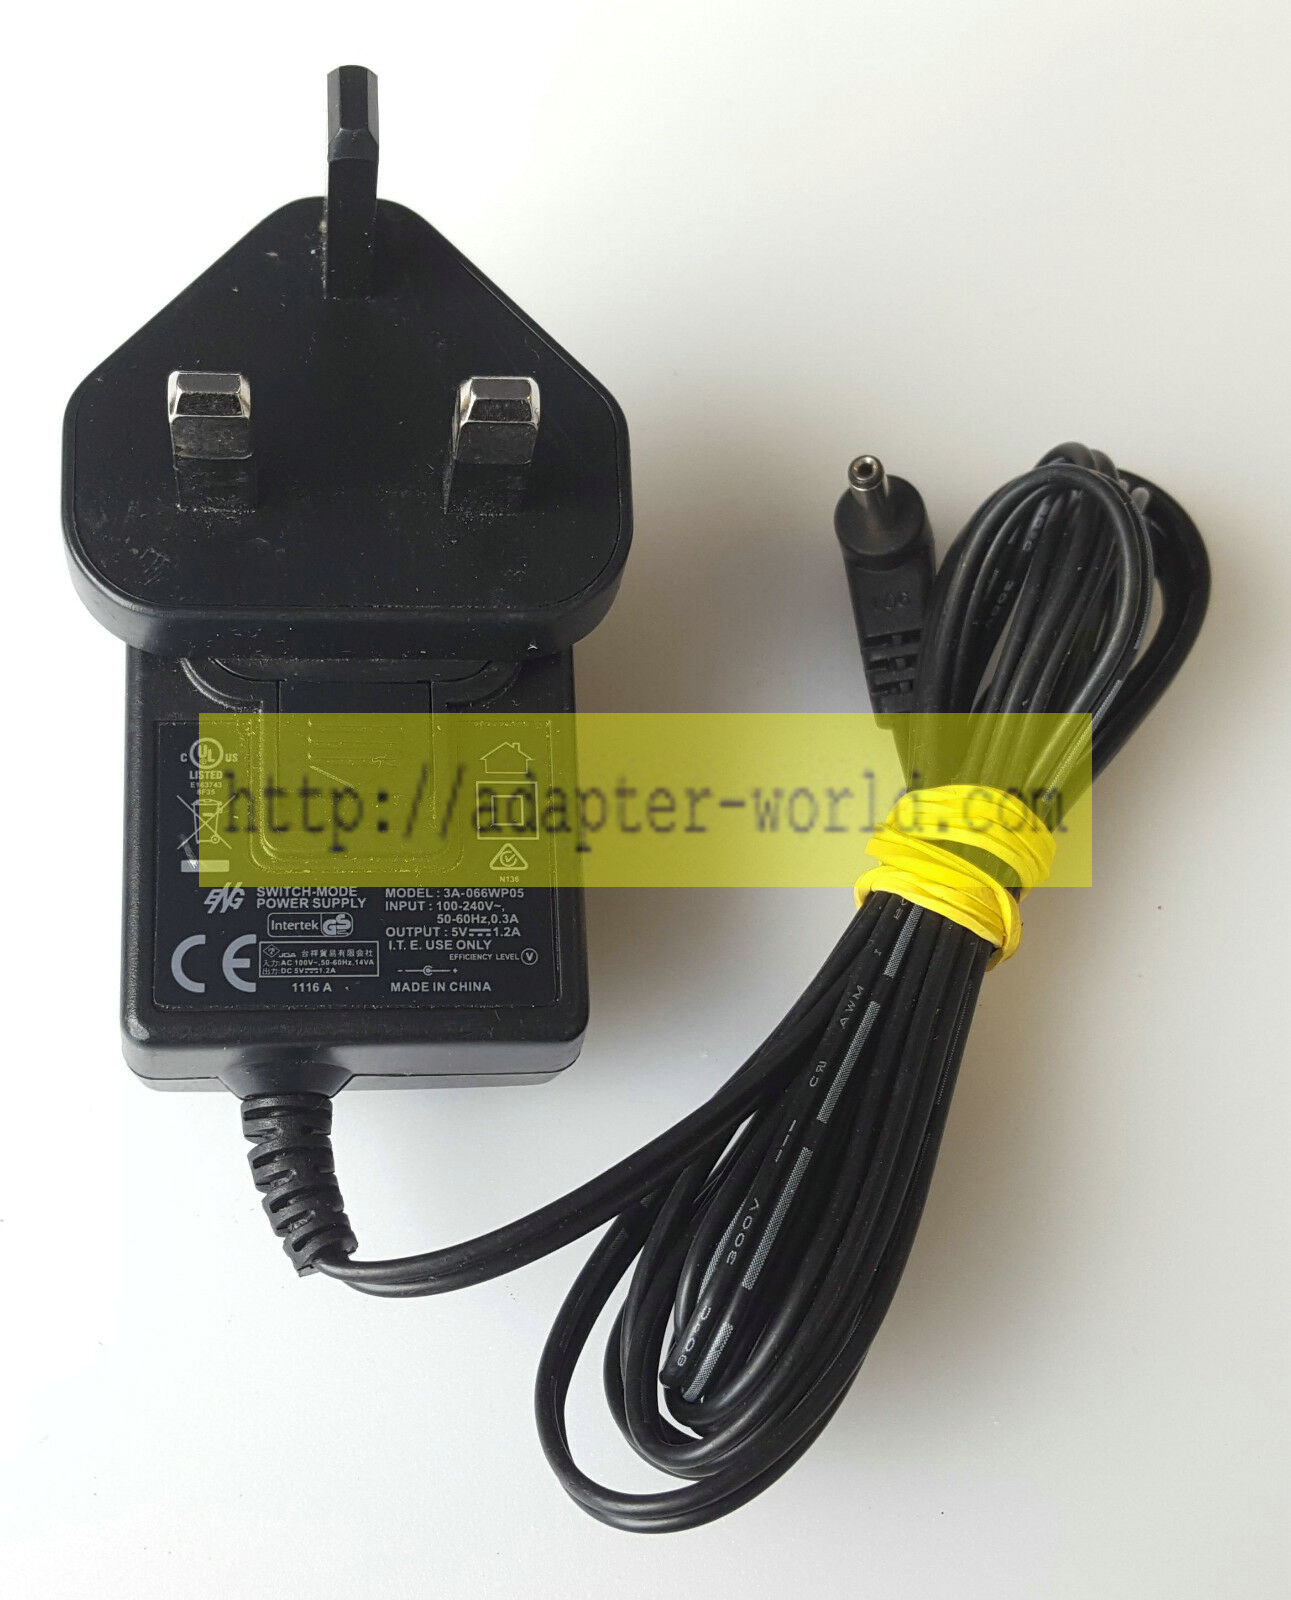 *Brand NEW*ENG 5V 1.2A 3A-066WP05 AC/DC SWITCH-MODE ADAPTER POWER SUPPLY - Click Image to Close